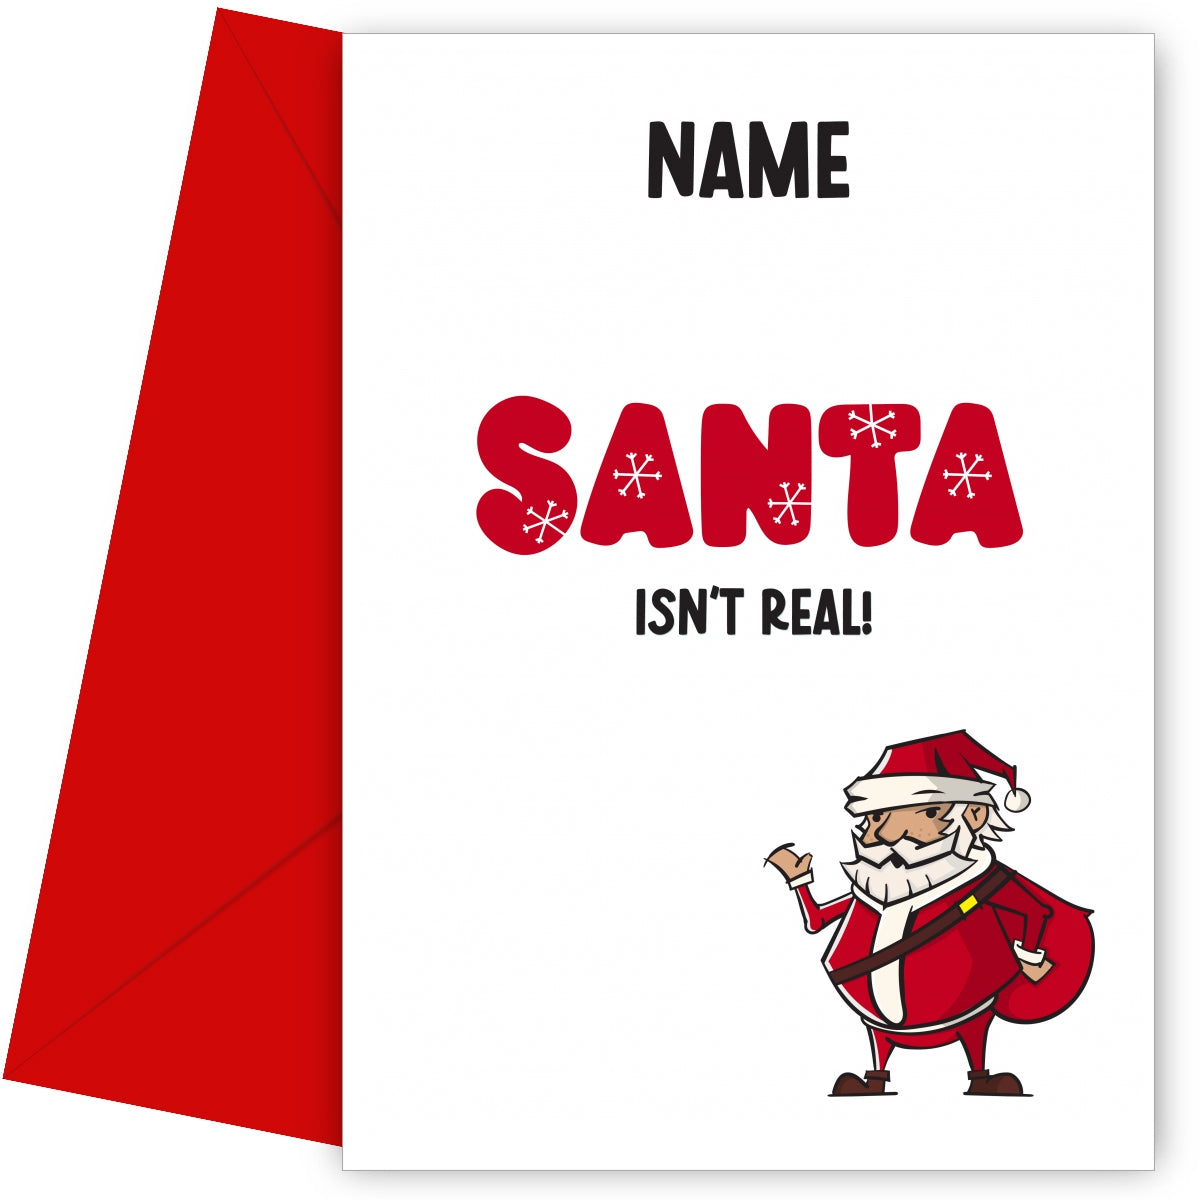 Humorous Christmas Card for Teenager, Friends and Family - Santa Isn't Real!